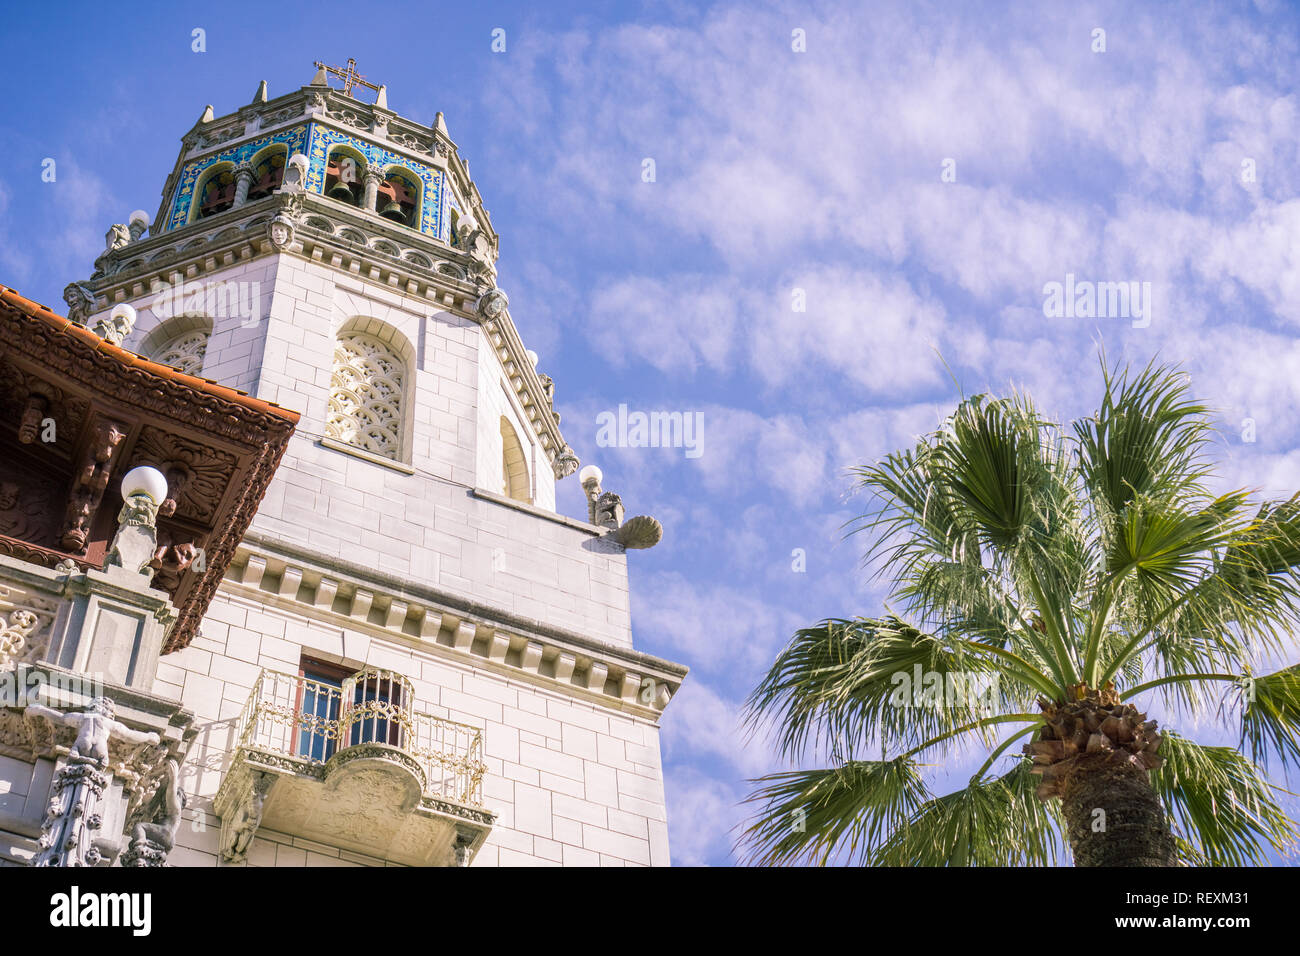 December 23, 2017 San Simeon / CA / USA - Looking up to one of the towers of Casa Grande, Hearst Castle Stock Photo